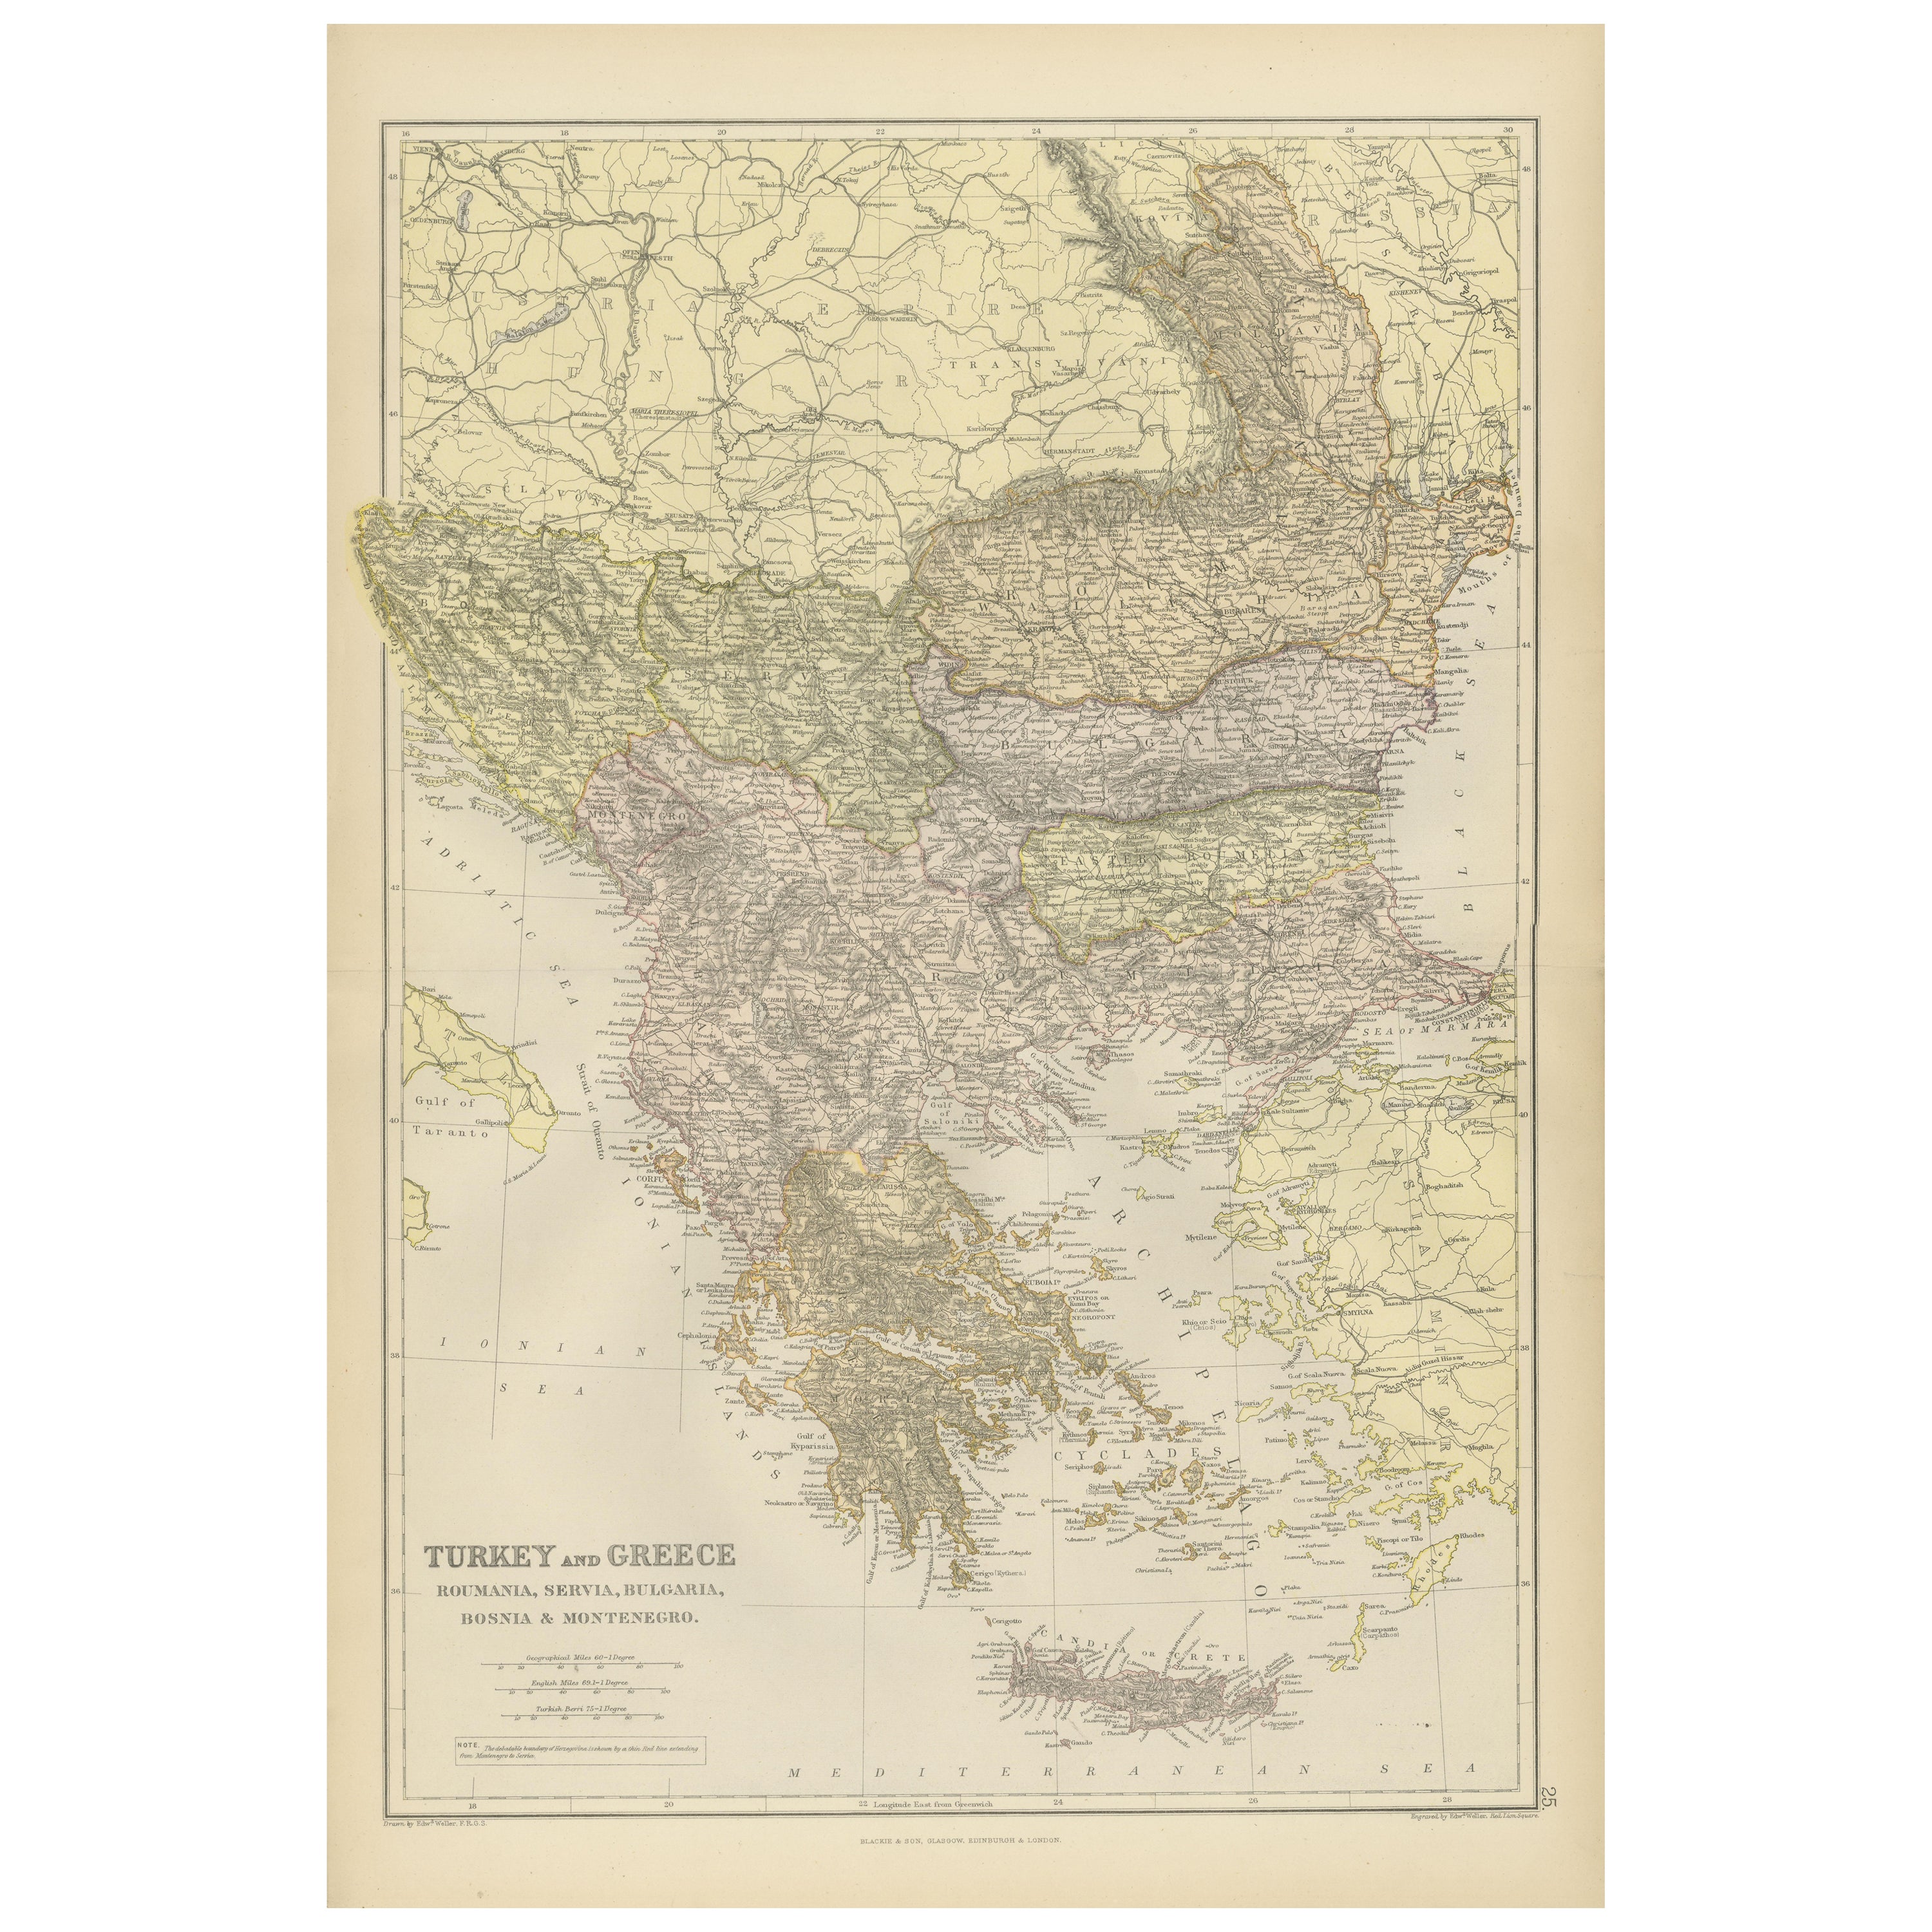 Balkan Convergence: A Map of Turkey and Greece with the Balkan States, 1882